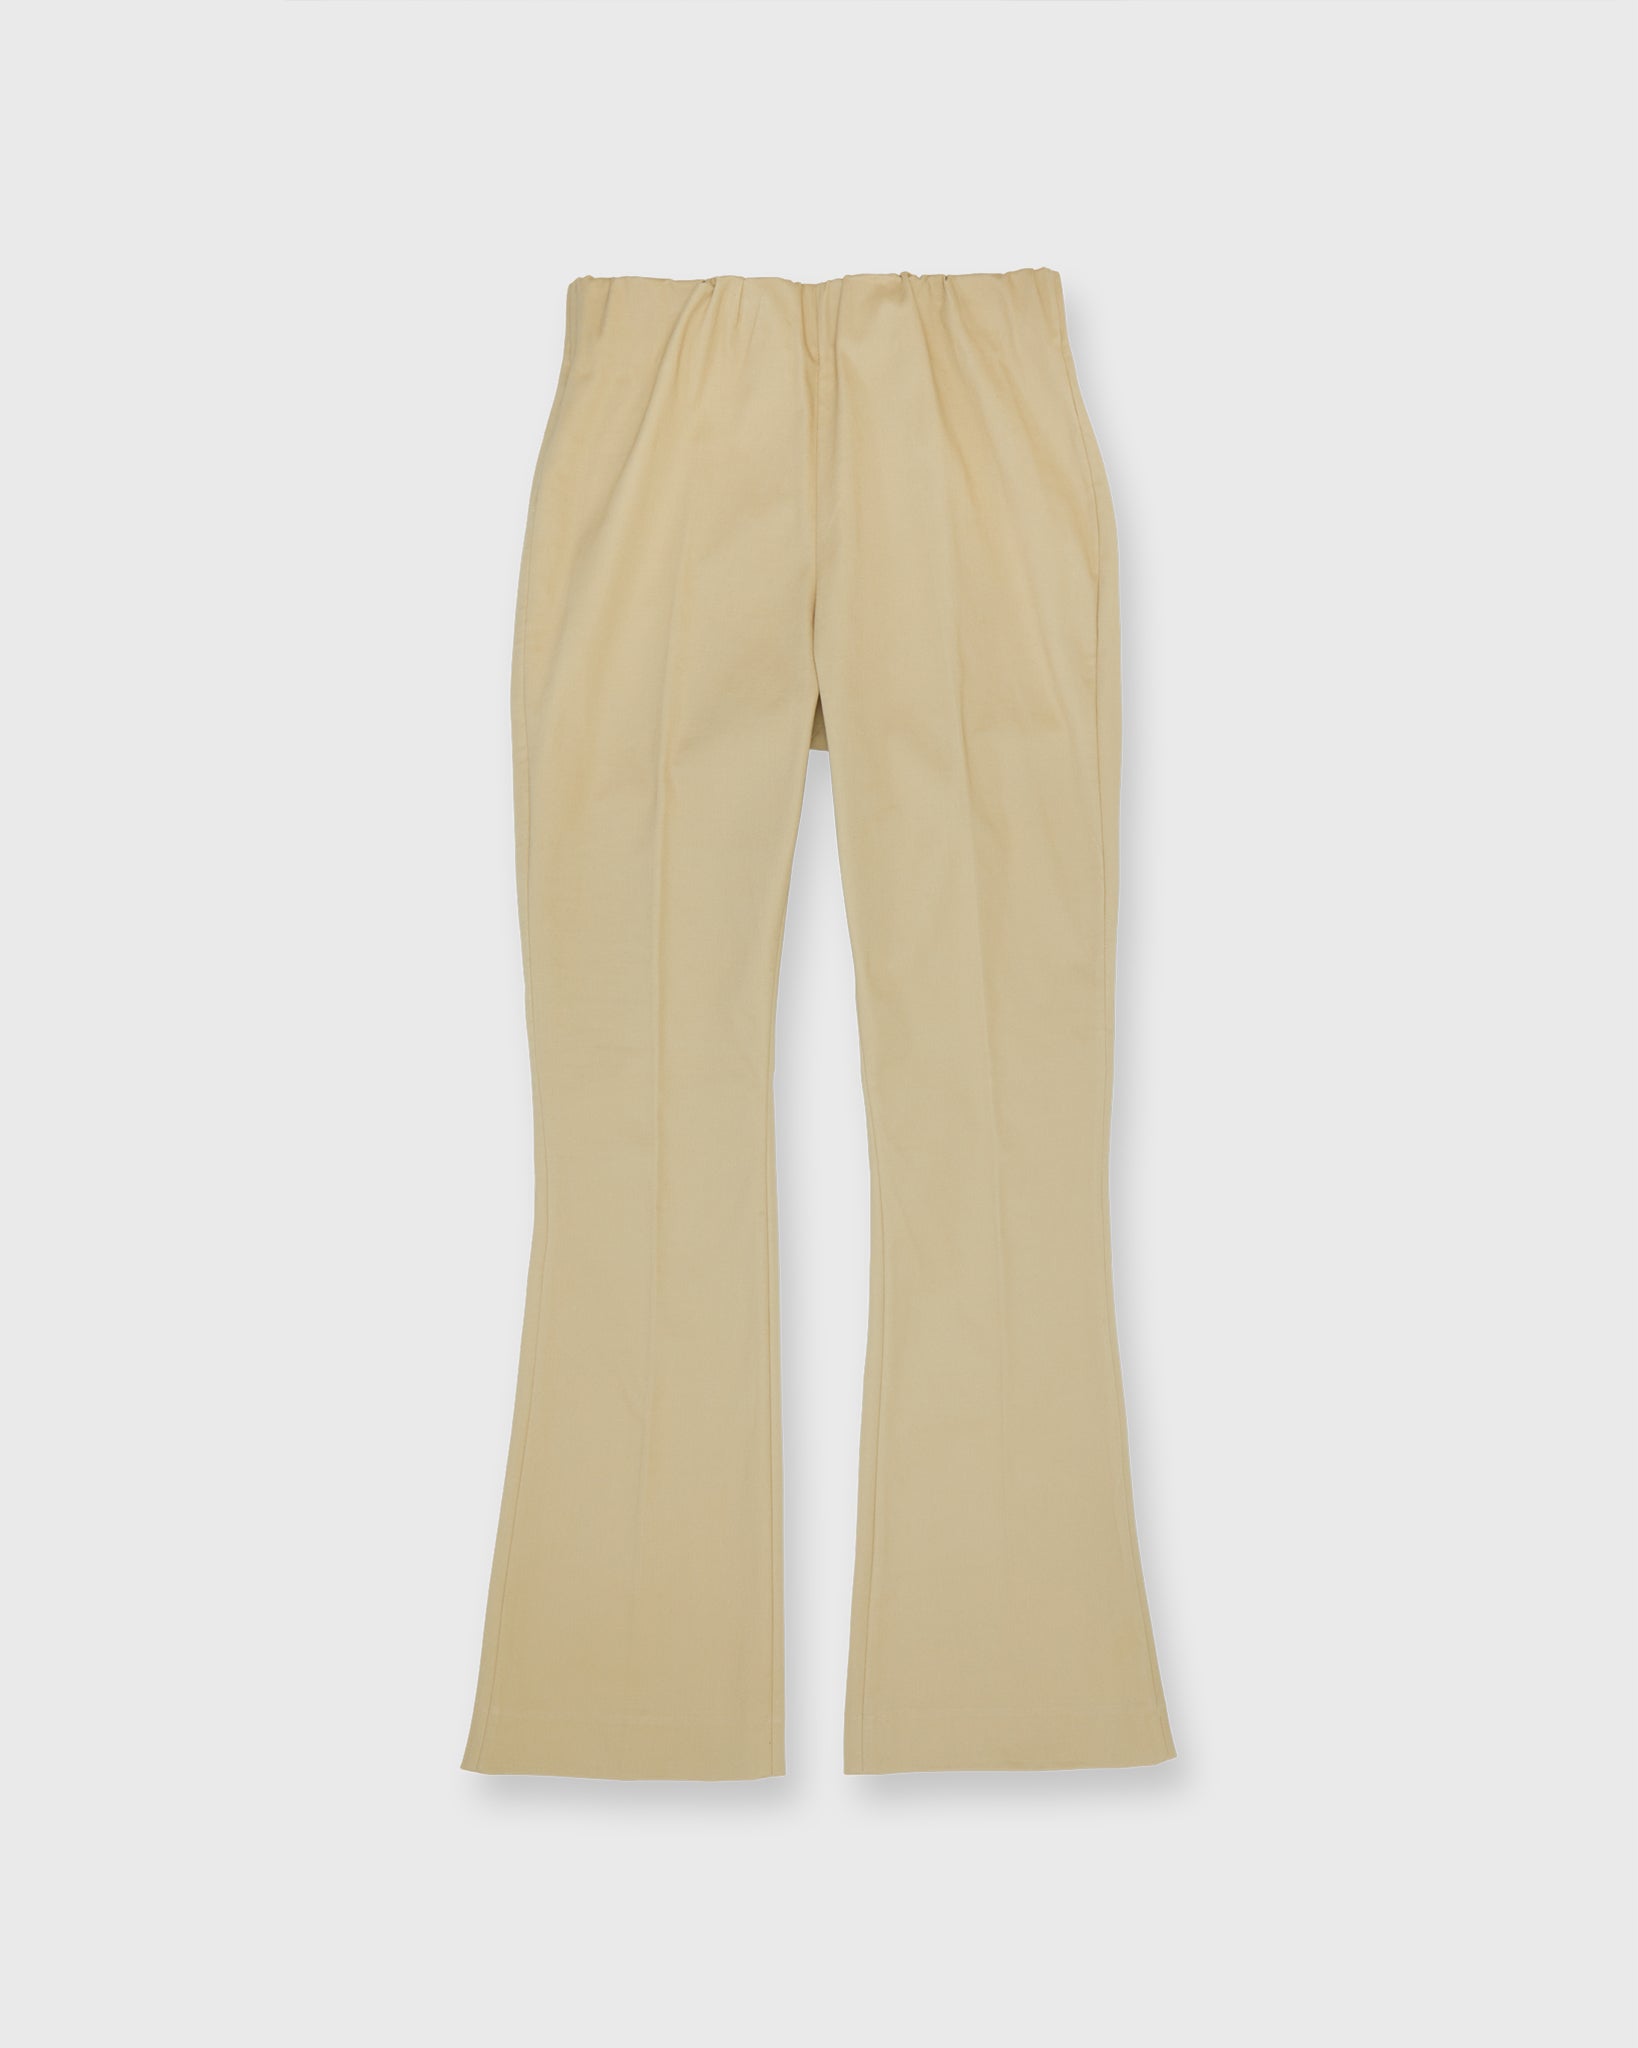 Faye Flare Cropped Pant in Khaki Stretch Sateen